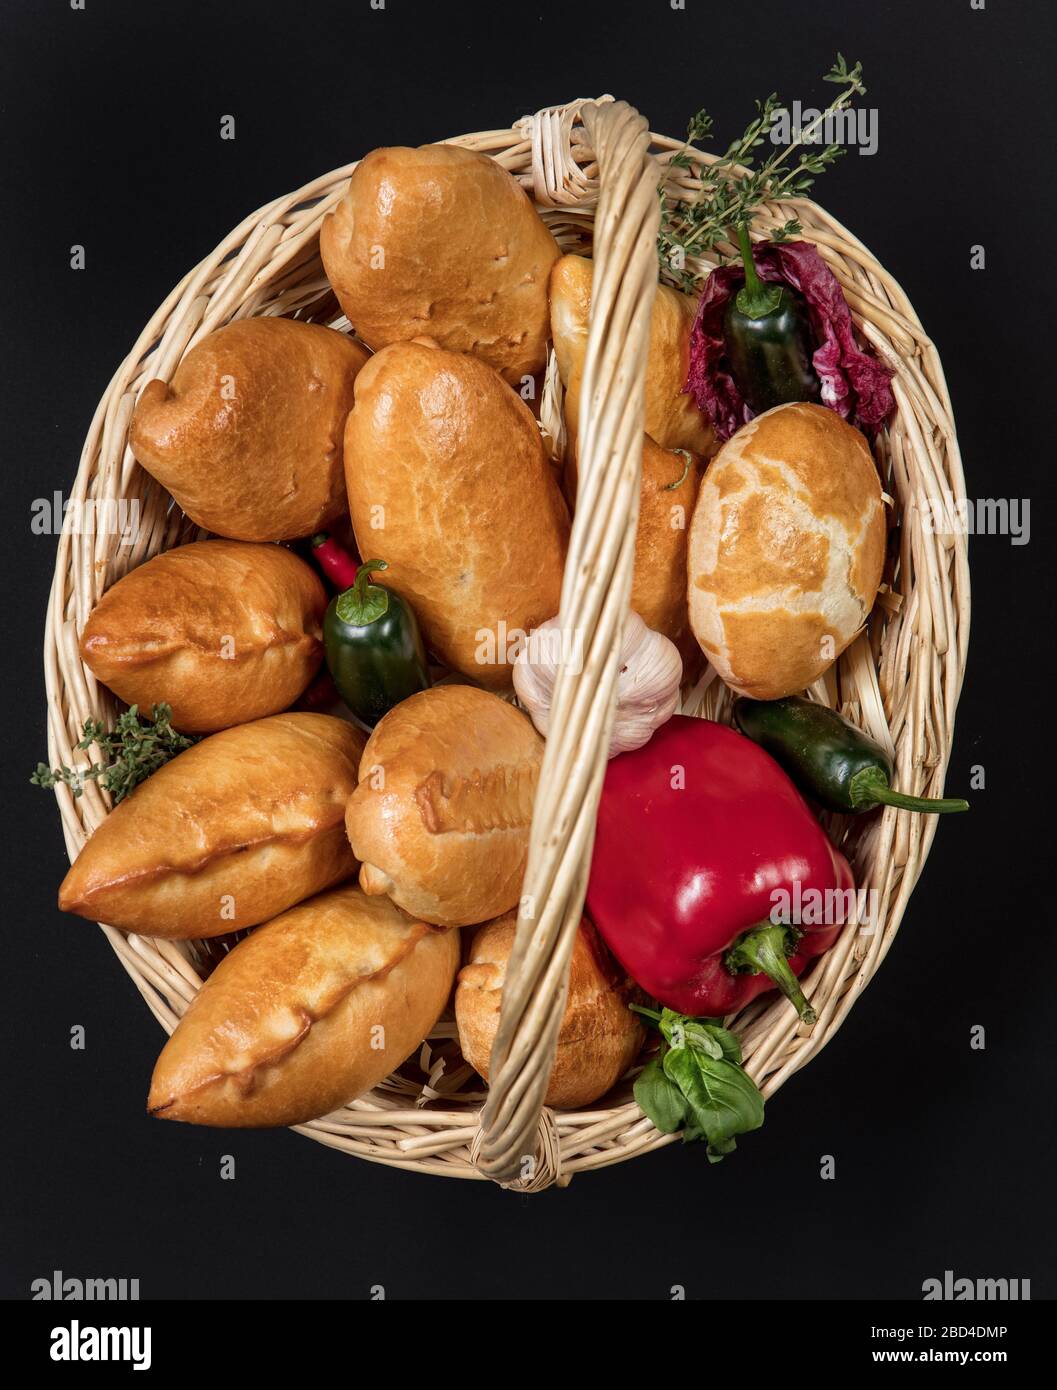 Pies with meat in the wicker basket on a black background Stock Photo